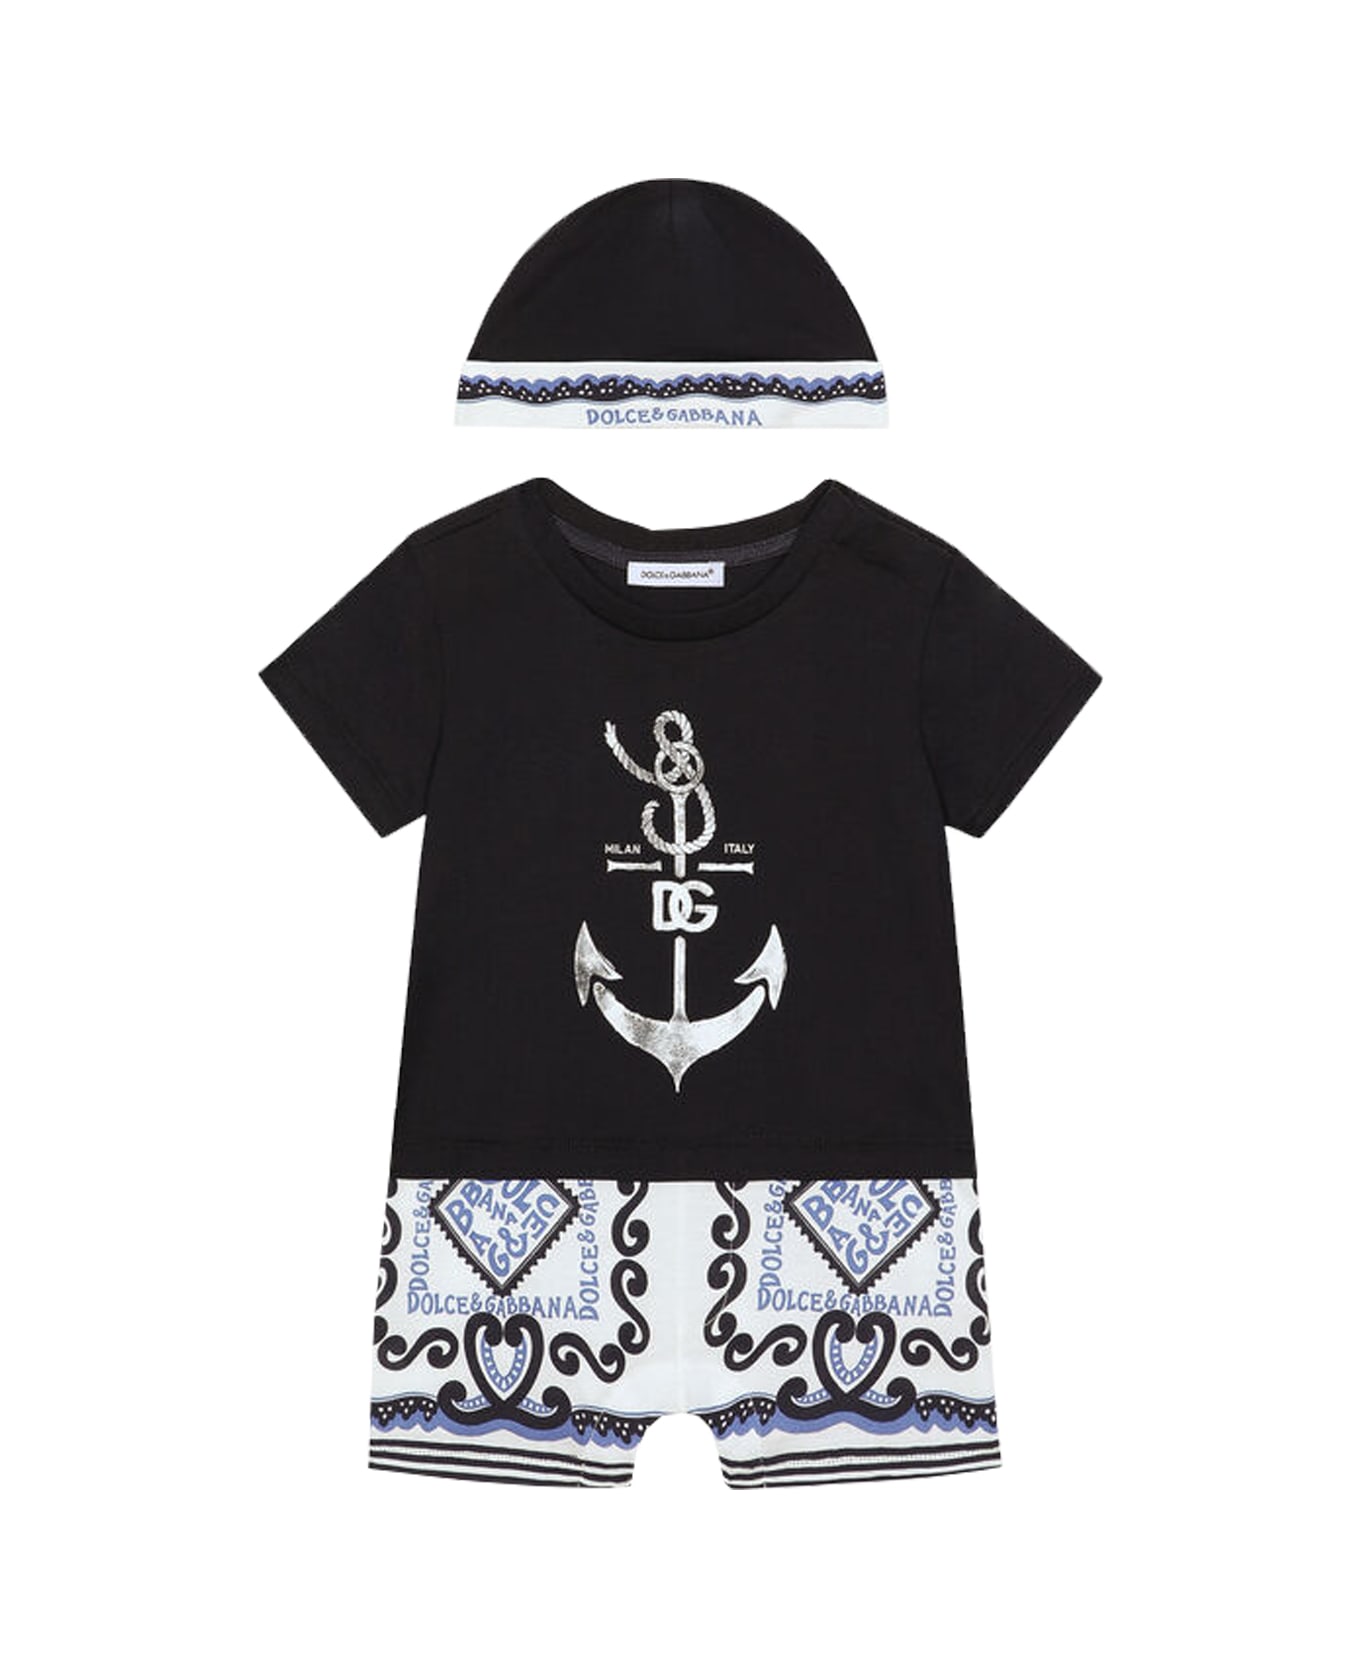 Dolce & Gabbana 2 Piece Gift Set Navy Print Jersey - Multicolor アクセサリー＆ギフト